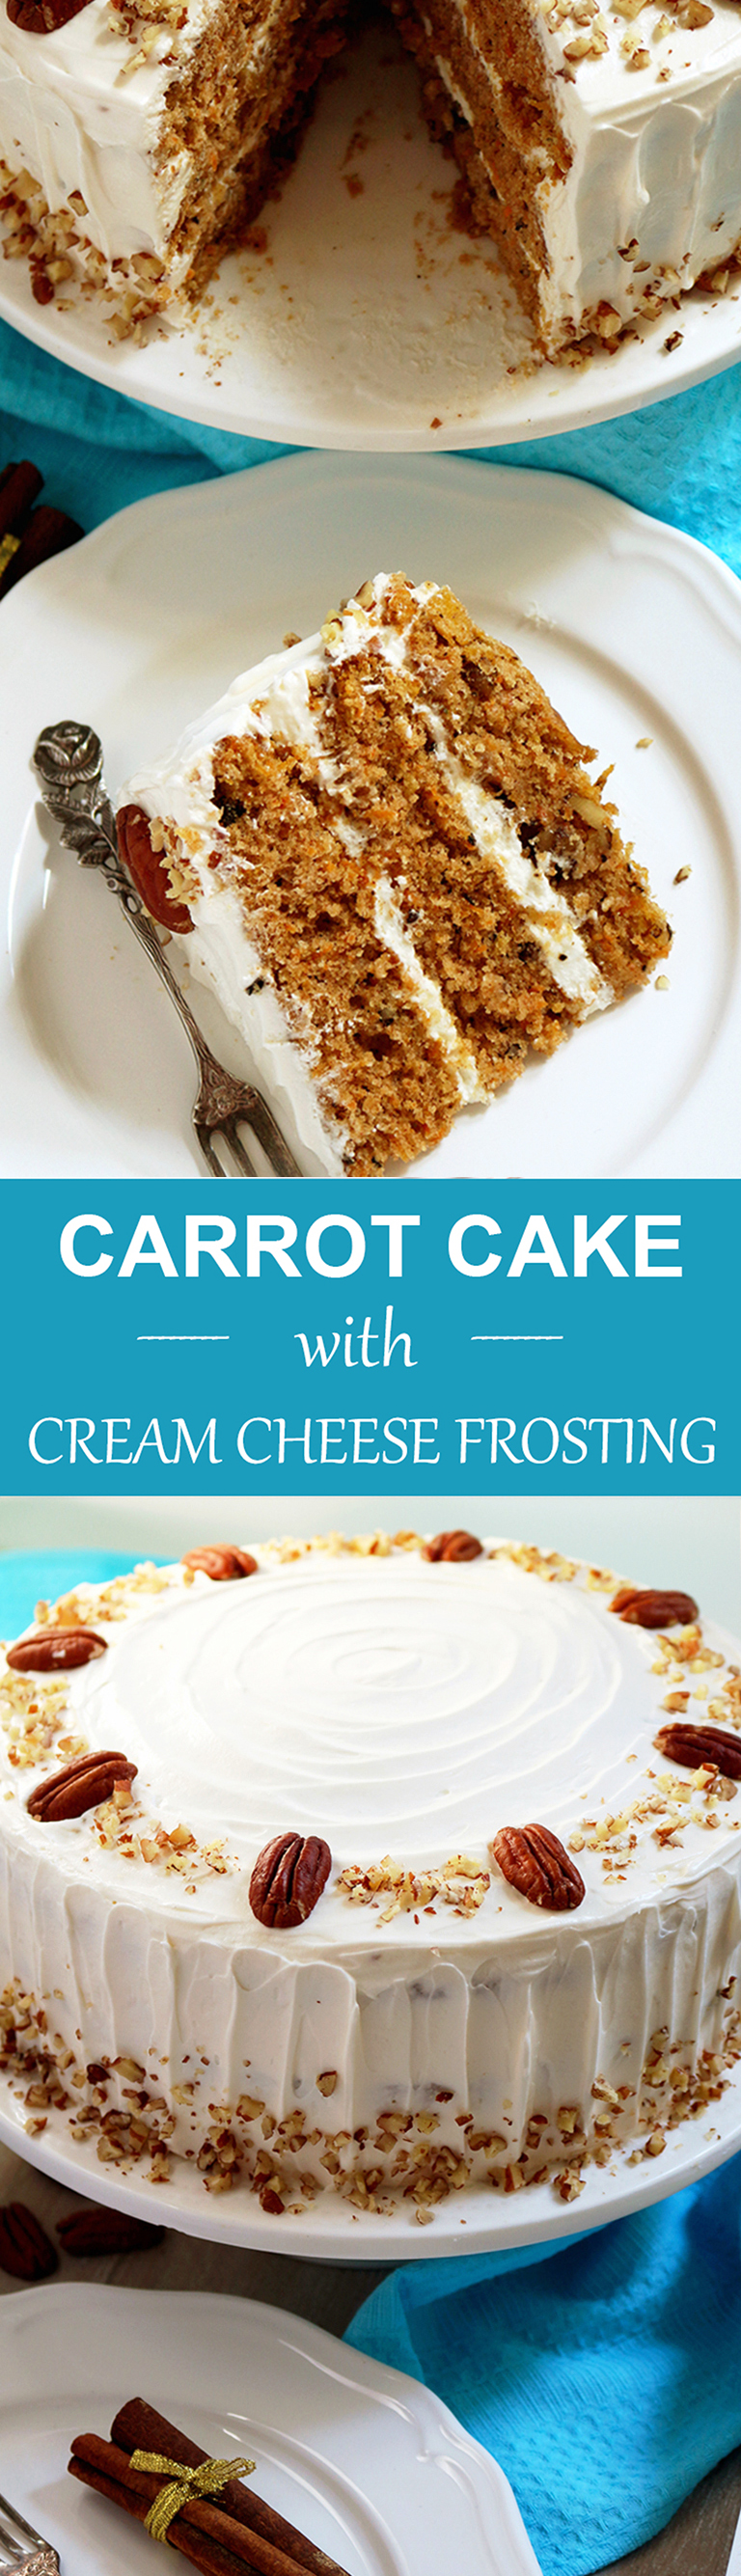 Special dessert for special occasions – Carrot Cake with Cream Cheese Frosting